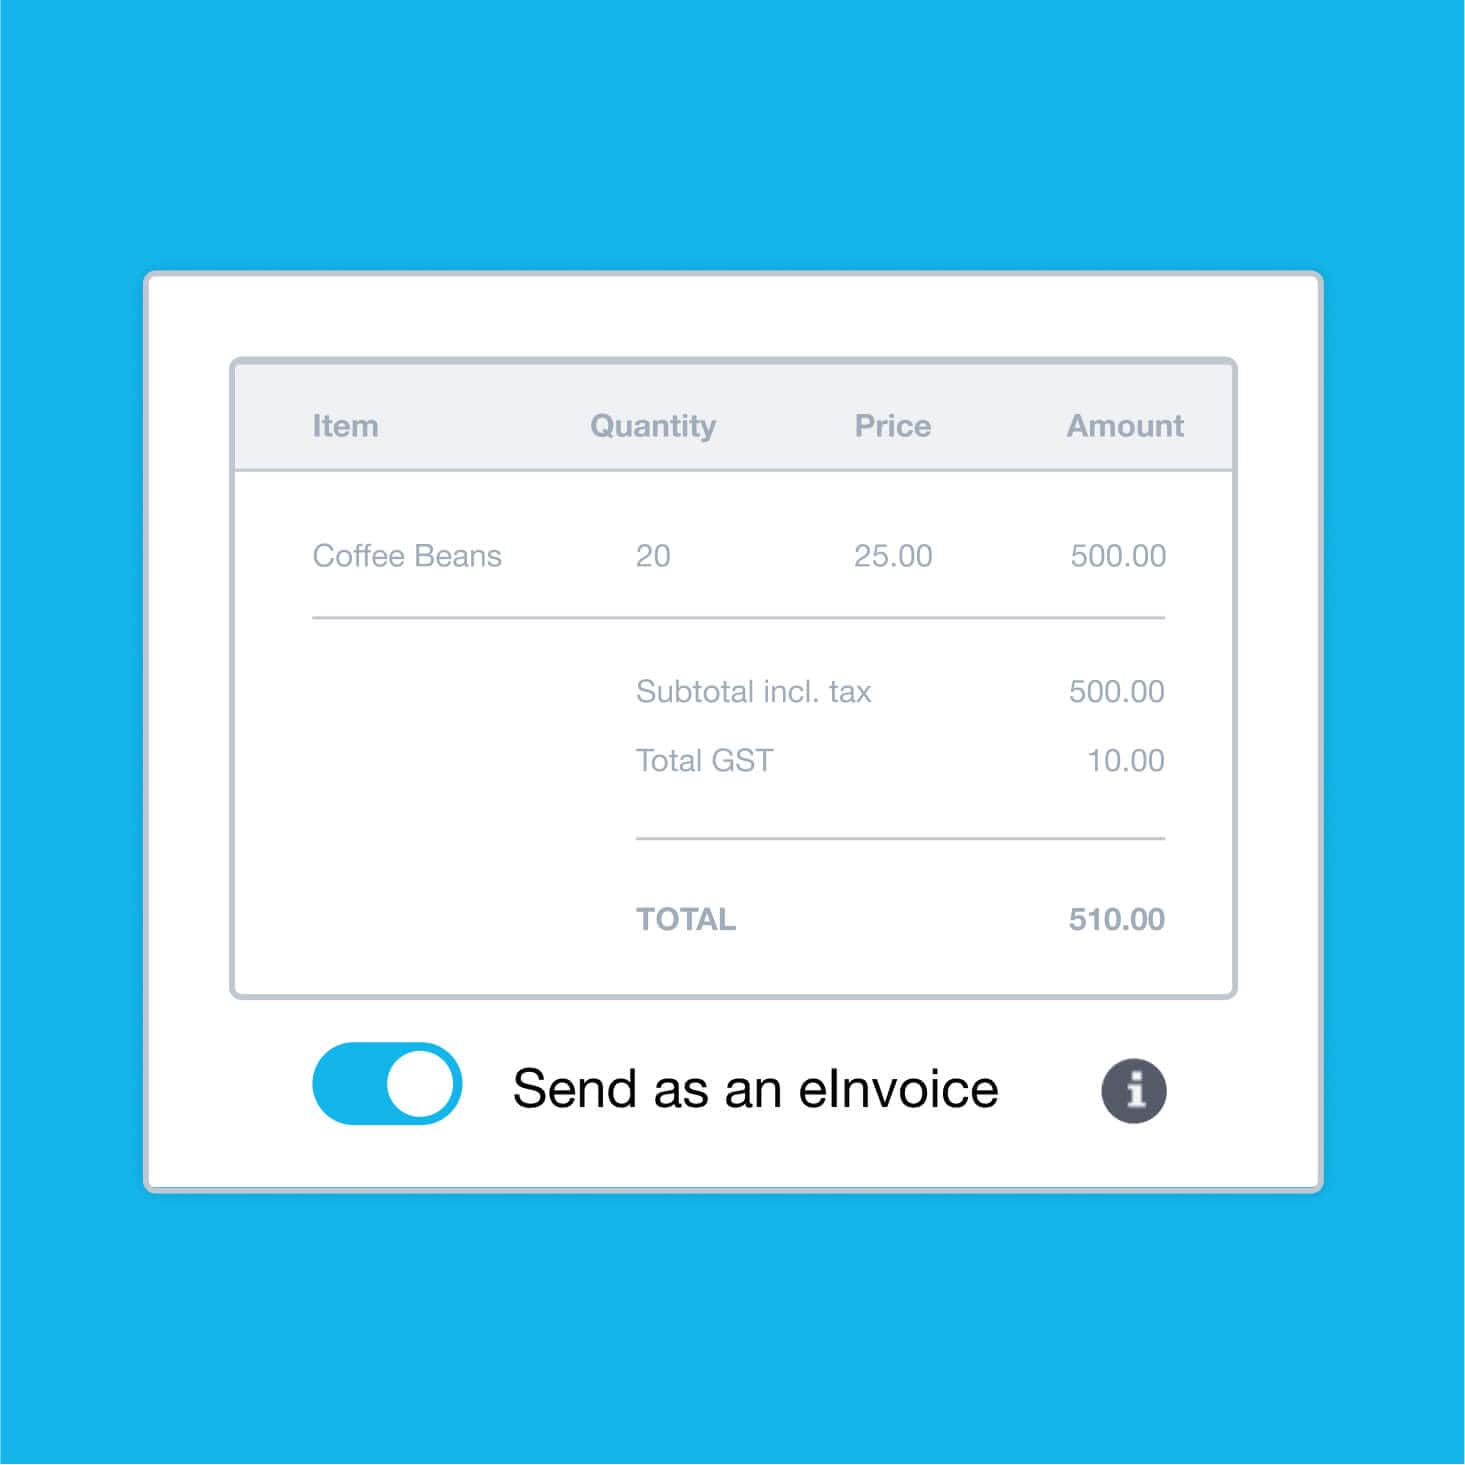 Electronic invoicing software shows a ‘Send as an e-invoice’ button so you can invoice NZ business customers directly.